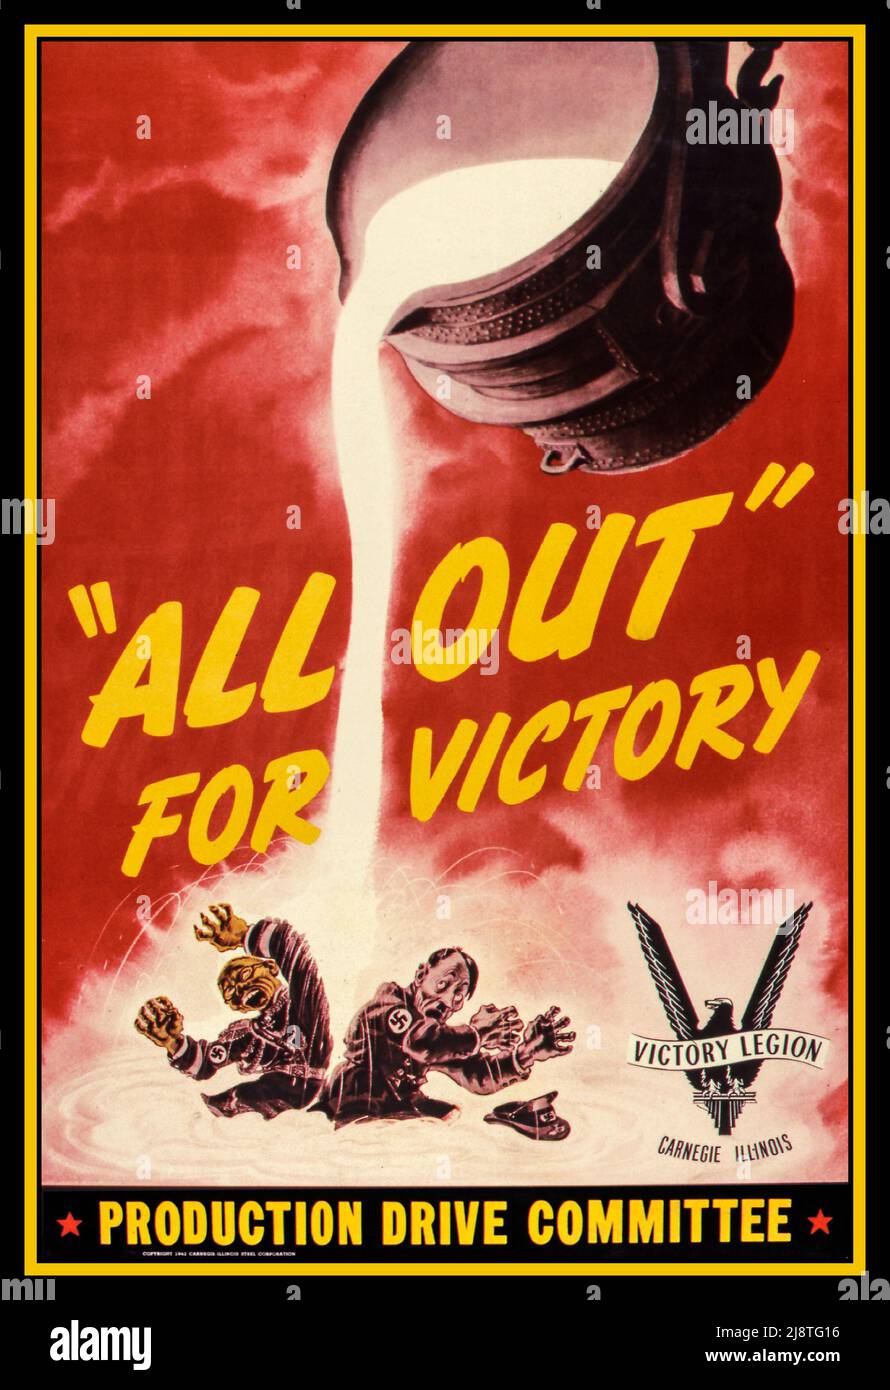 WW2 USA Propaganda Poster for War Industrial output 'All out' for victory'. 'Production Drive Committee'  Axis leaders Hideki Tojo, Japan and Adolf Hitler Nazi Germany caricatures are seen with industrial hot metal being poured on them. Date between circa 1942 and circa 1943  Office for Emergency Management. War Production Board. (01/1942 - 11/03/1945) USA America Stock Photo